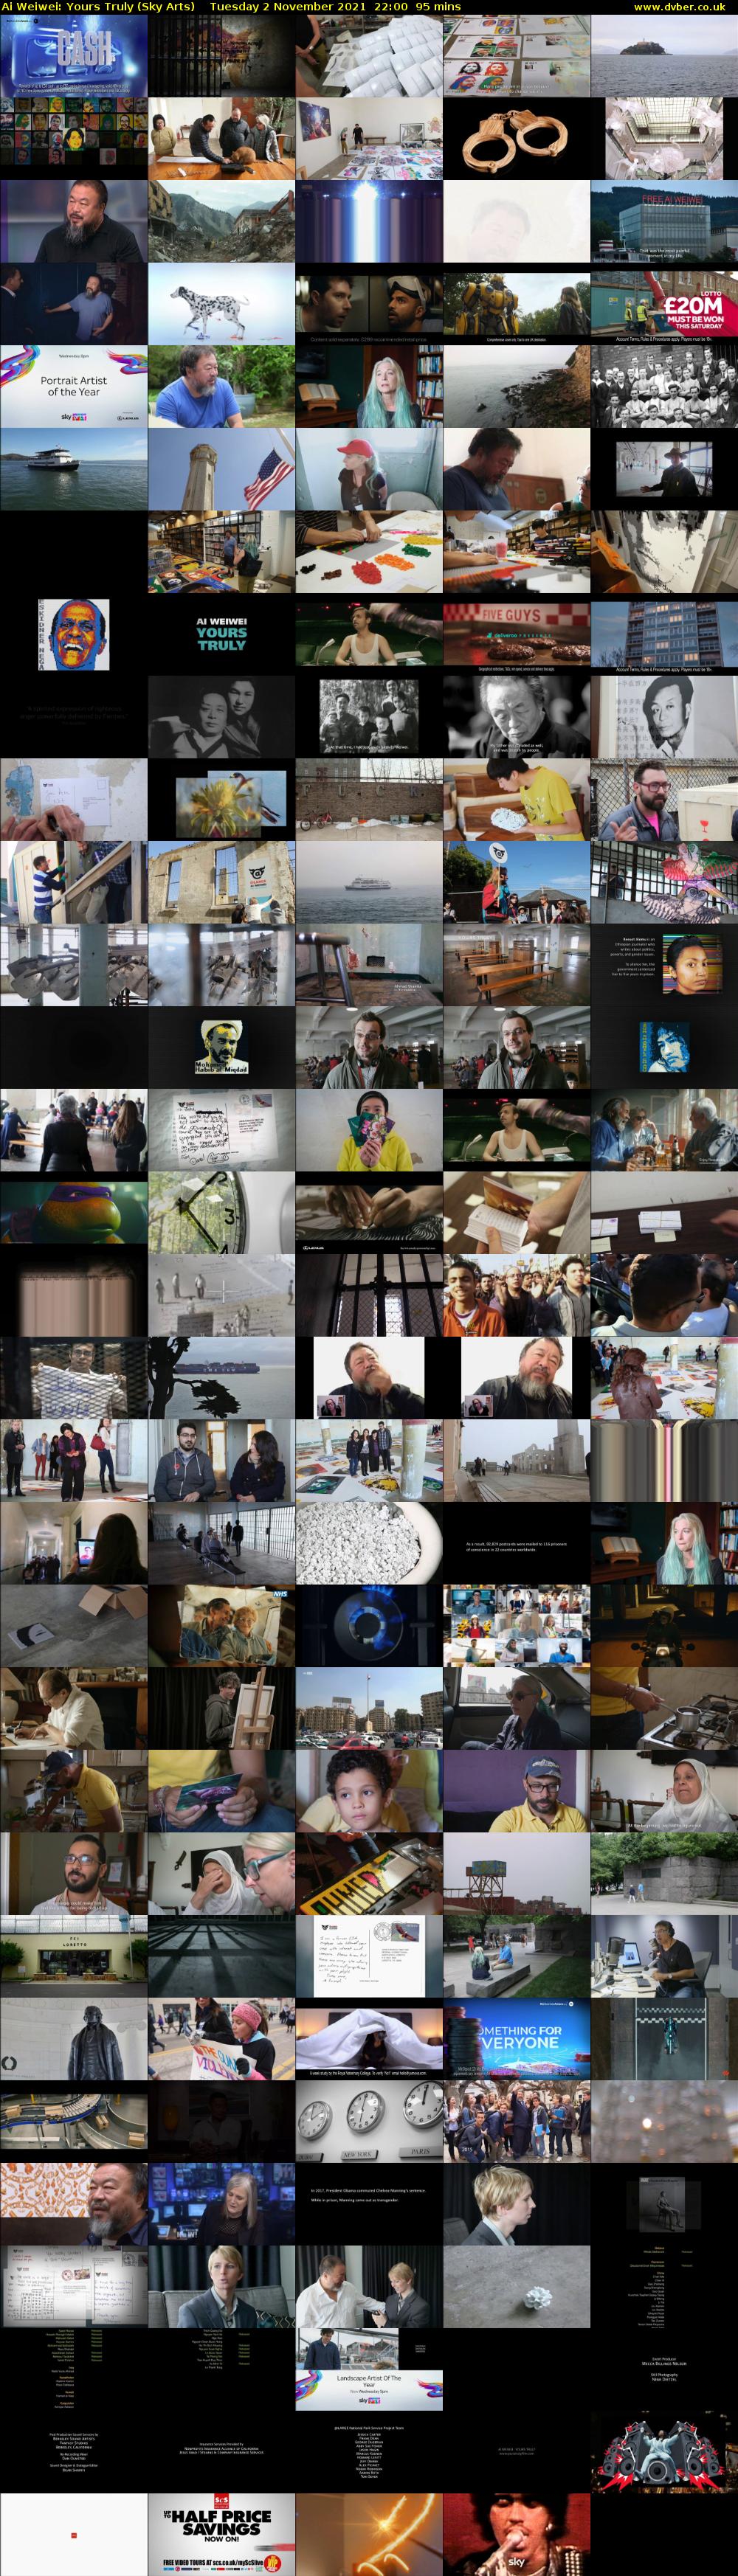 Ai Weiwei: Yours Truly (Sky Arts) Tuesday 2 November 2021 22:00 - 23:35